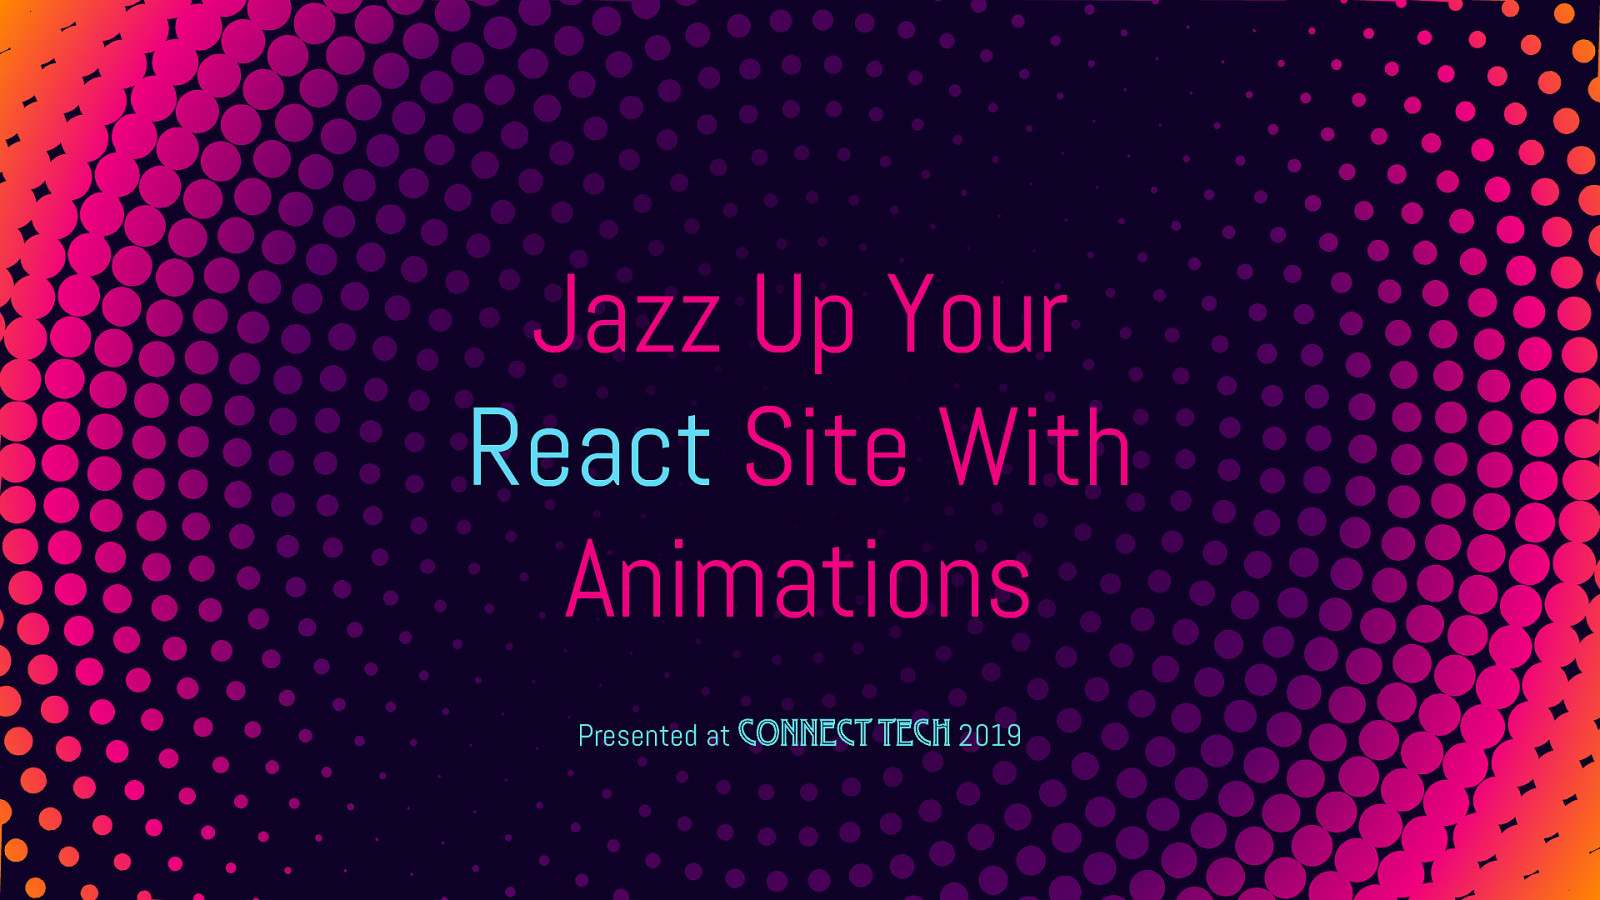 Jazz Up Your React Site With Animations